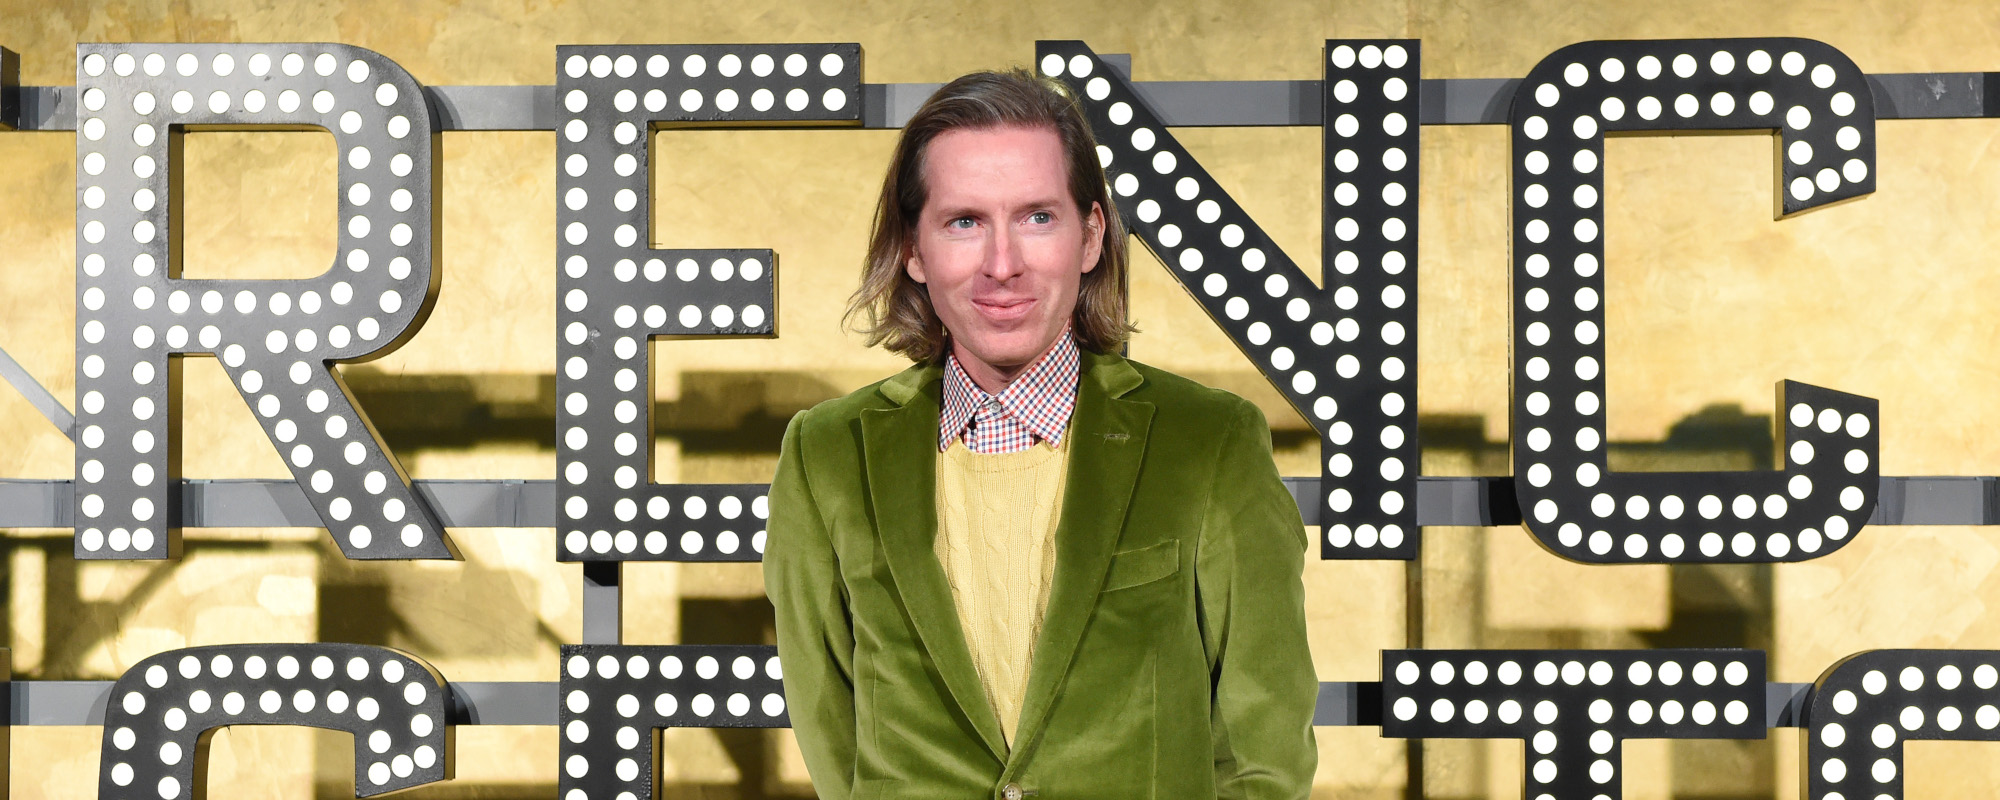 10 Wes Anderson Film Soundtracks Ranked Worst to Best